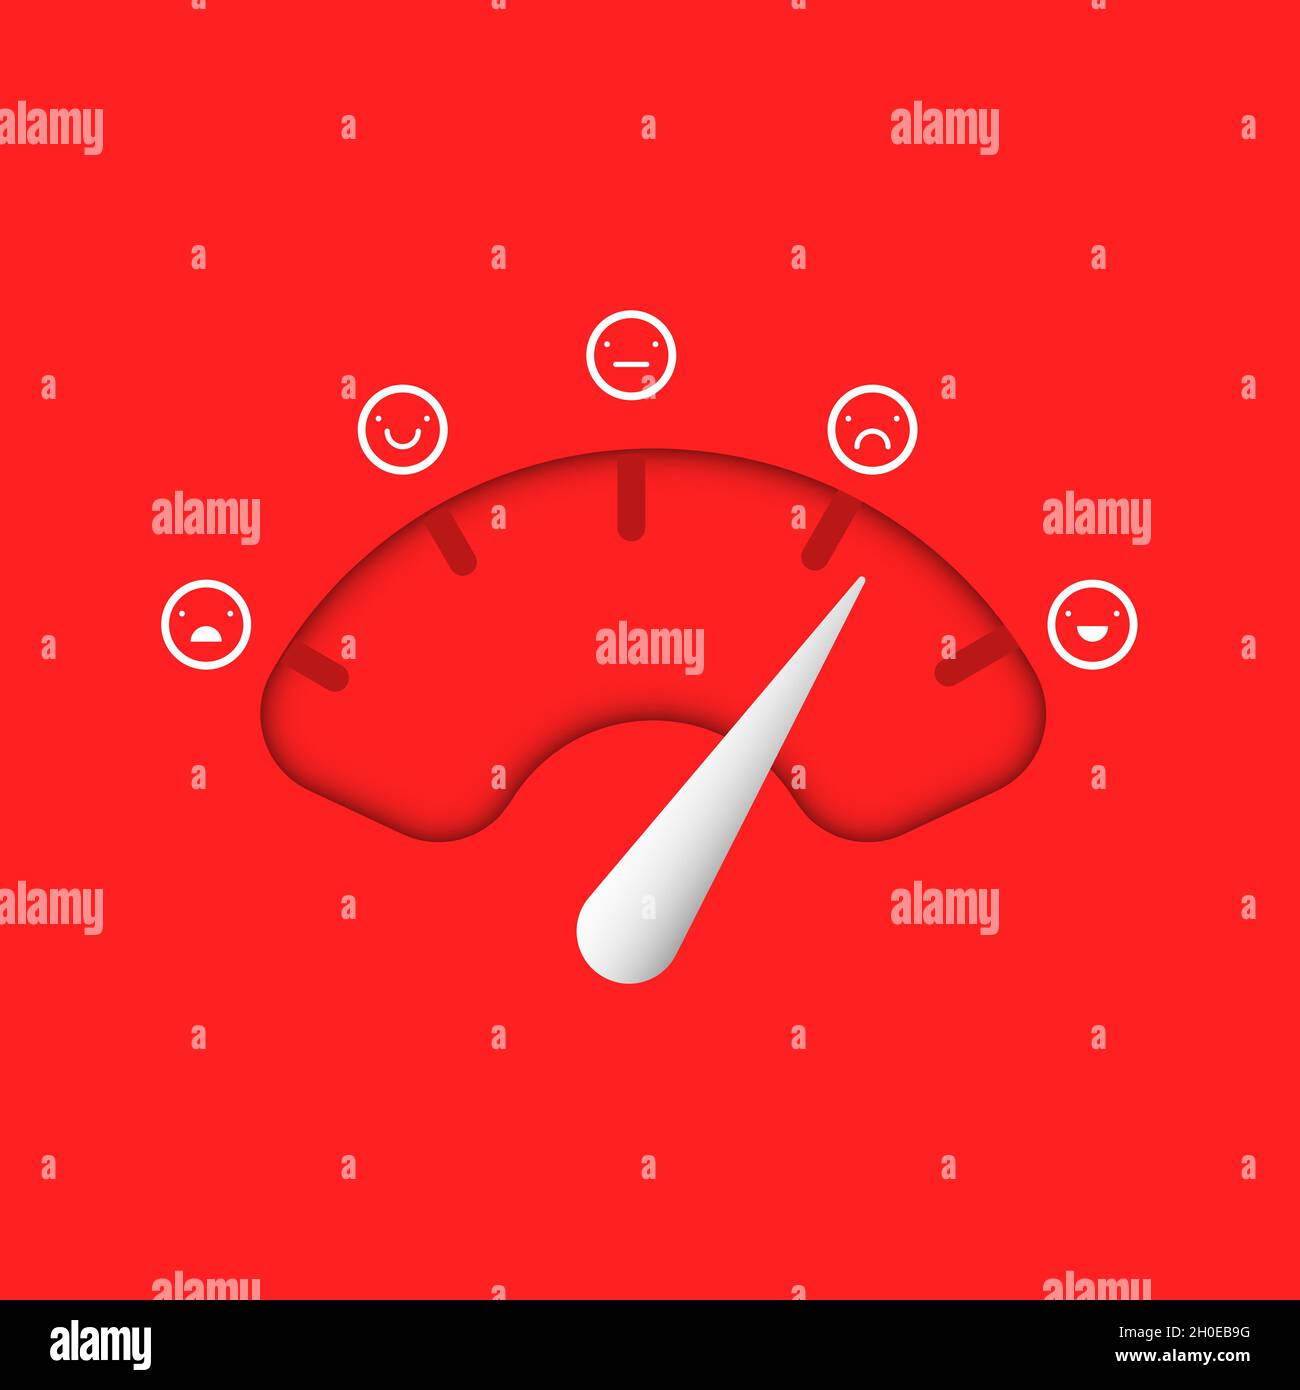 Face meter of happy, smile, normal and angry face icon with speedometers. Mood emoji icons level indicators with emoticons  from angry to happy. Stock Vector